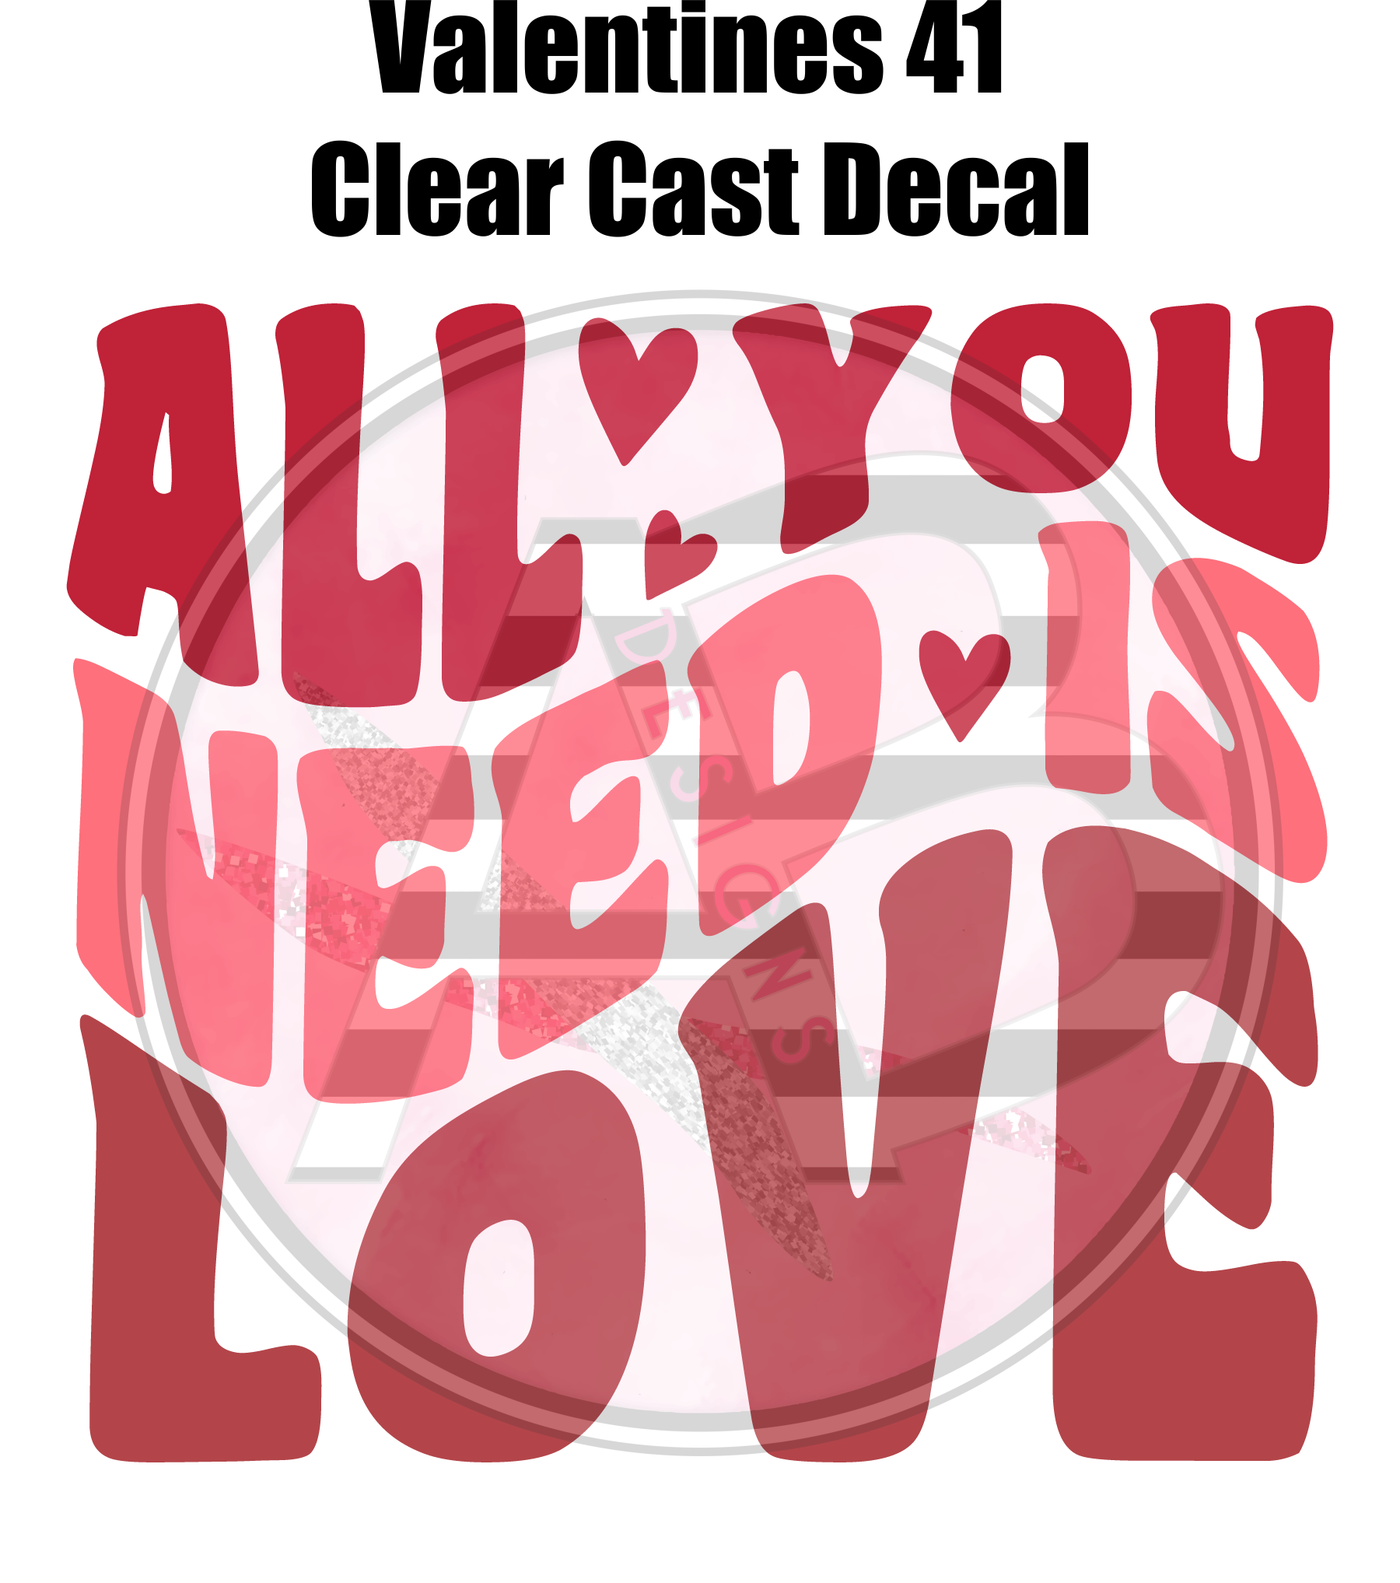 Valentines 41 - Clear Cast Decal